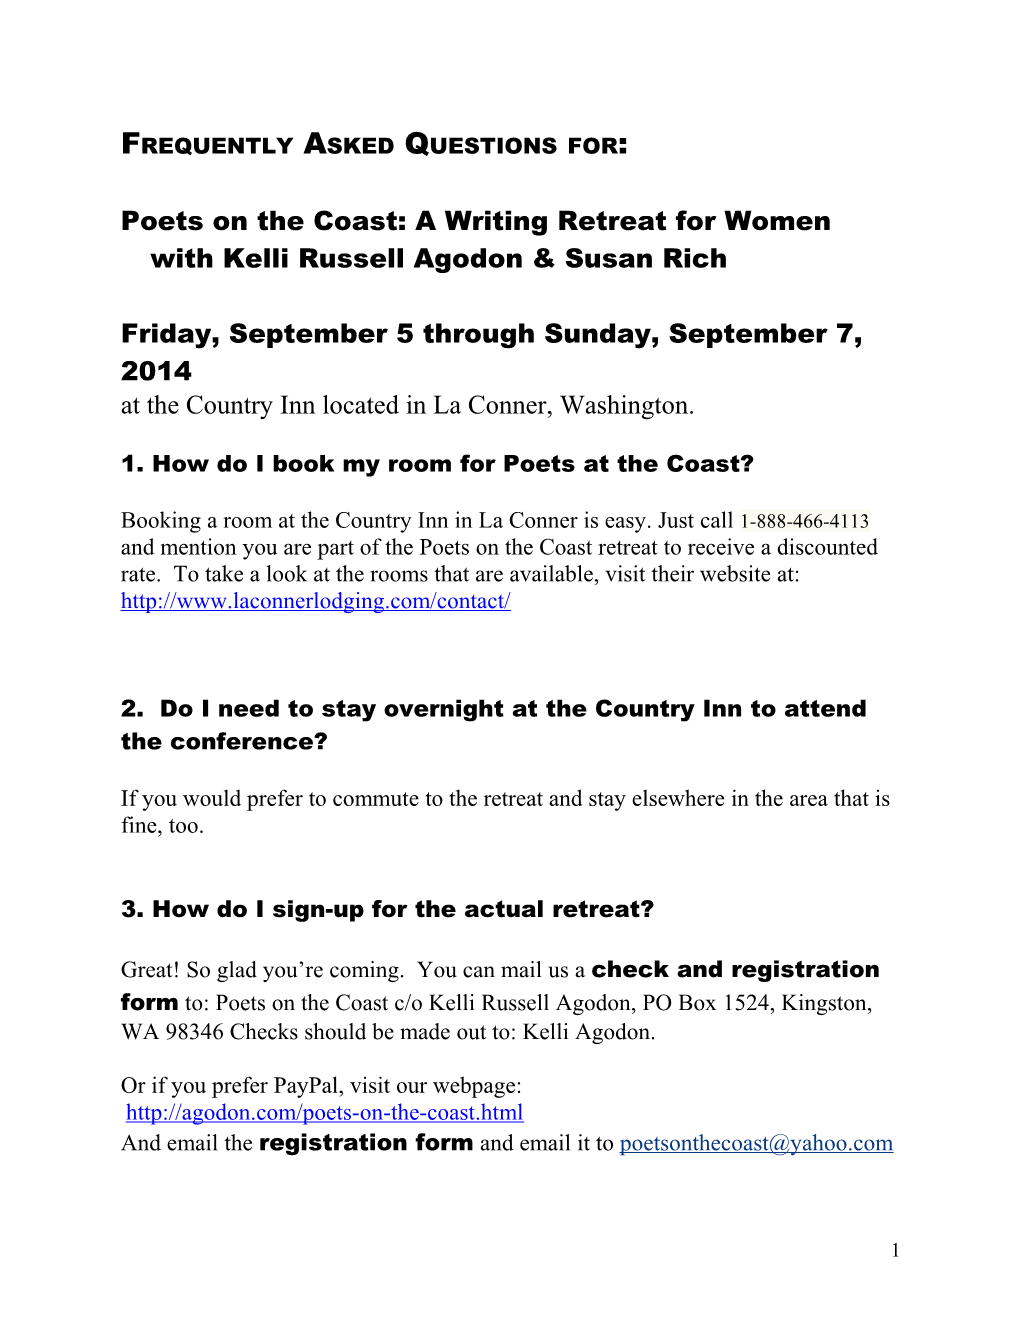 Poets on the Coast: a Writing Retreat for Women